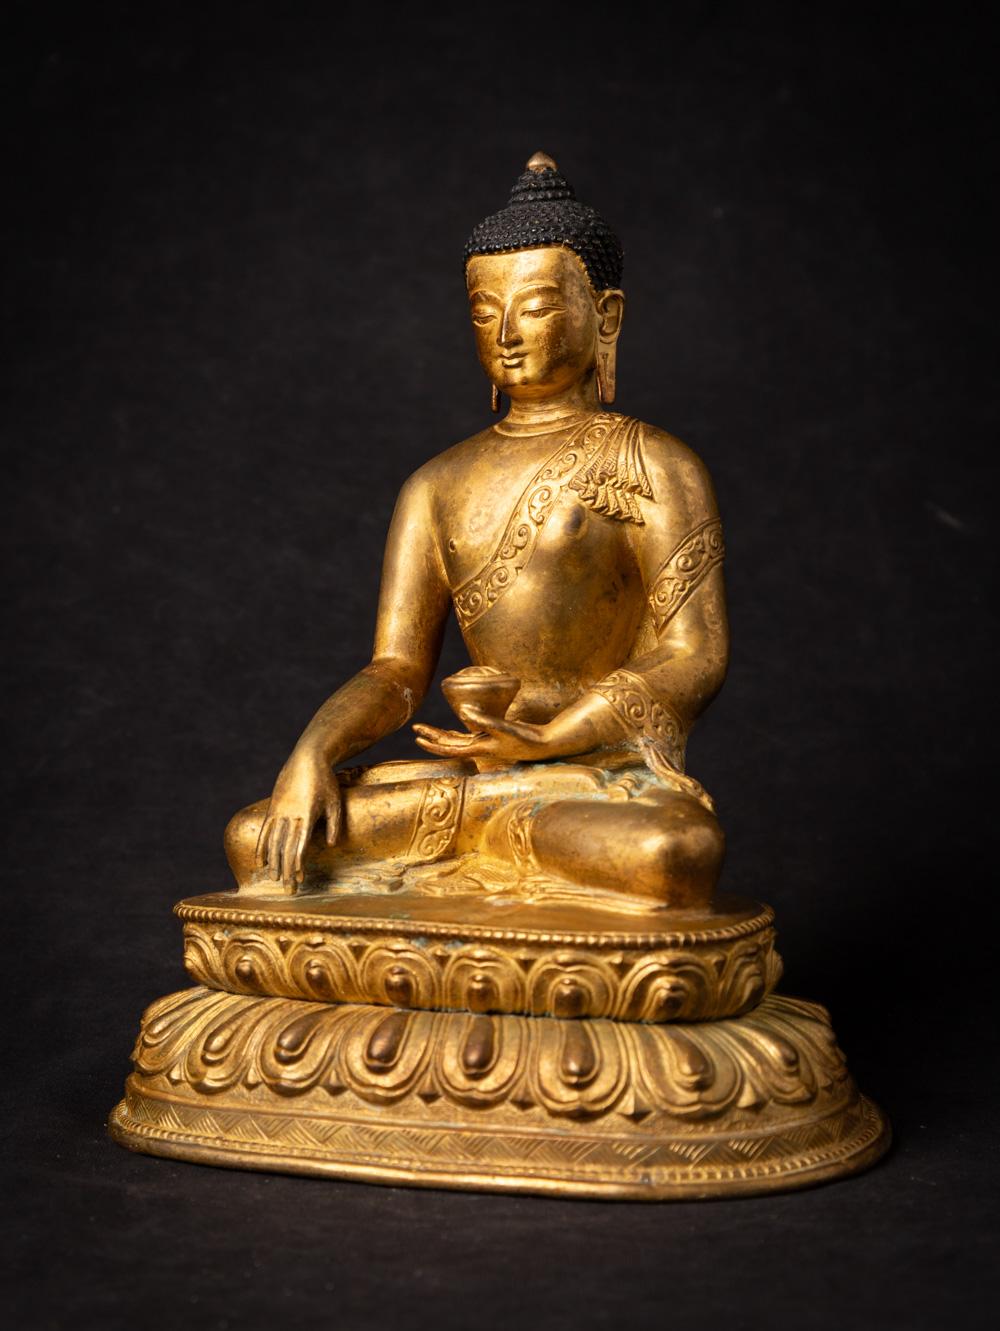 The old bronze Nepali Buddha statue is a striking testament to the artistic and spiritual heritage of Nepal. Crafted from bronze, this statue stands at a height of 23.9 cm, with dimensions of 19.8 cm in width and 14.4 cm in depth. Its intricate